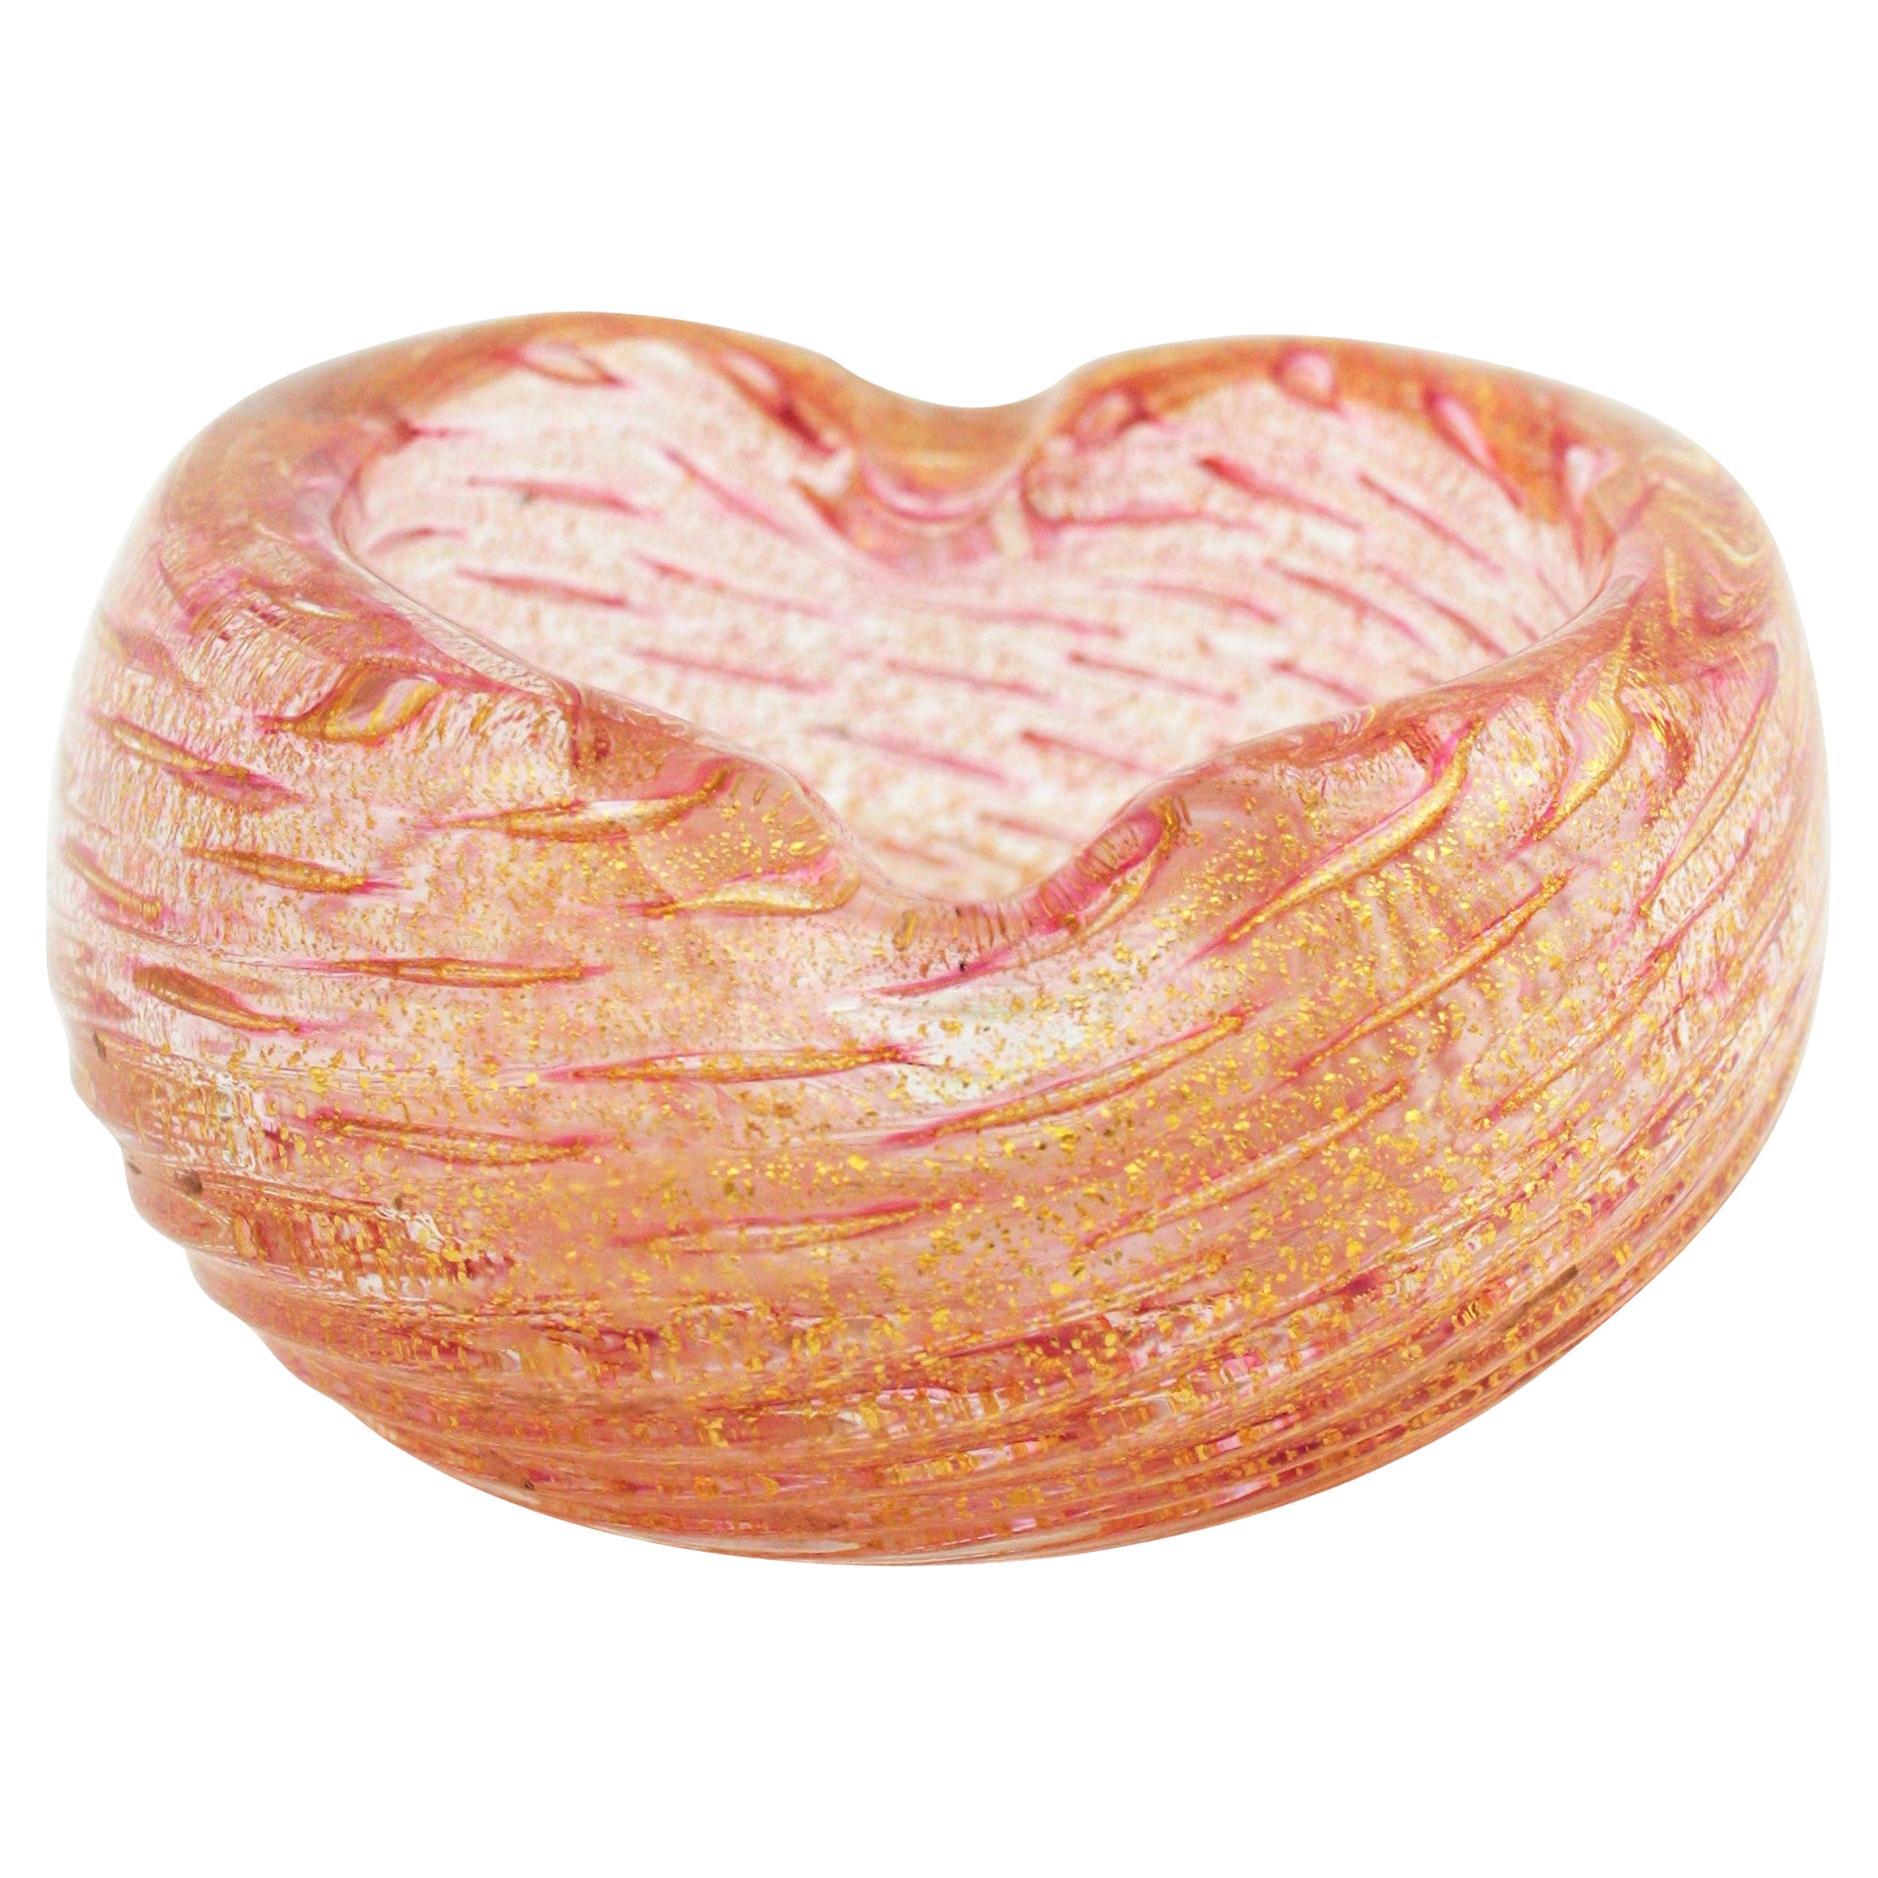 Amazing scalloped Murano pink blown glass ashtray or bowl with aventurine gold and copper flecks. Attributed to Barovier e Toso, Italy, 1950s.
It has controlled bubbles and a scalloped and swirl design and the copper and gold flecks give a luxury